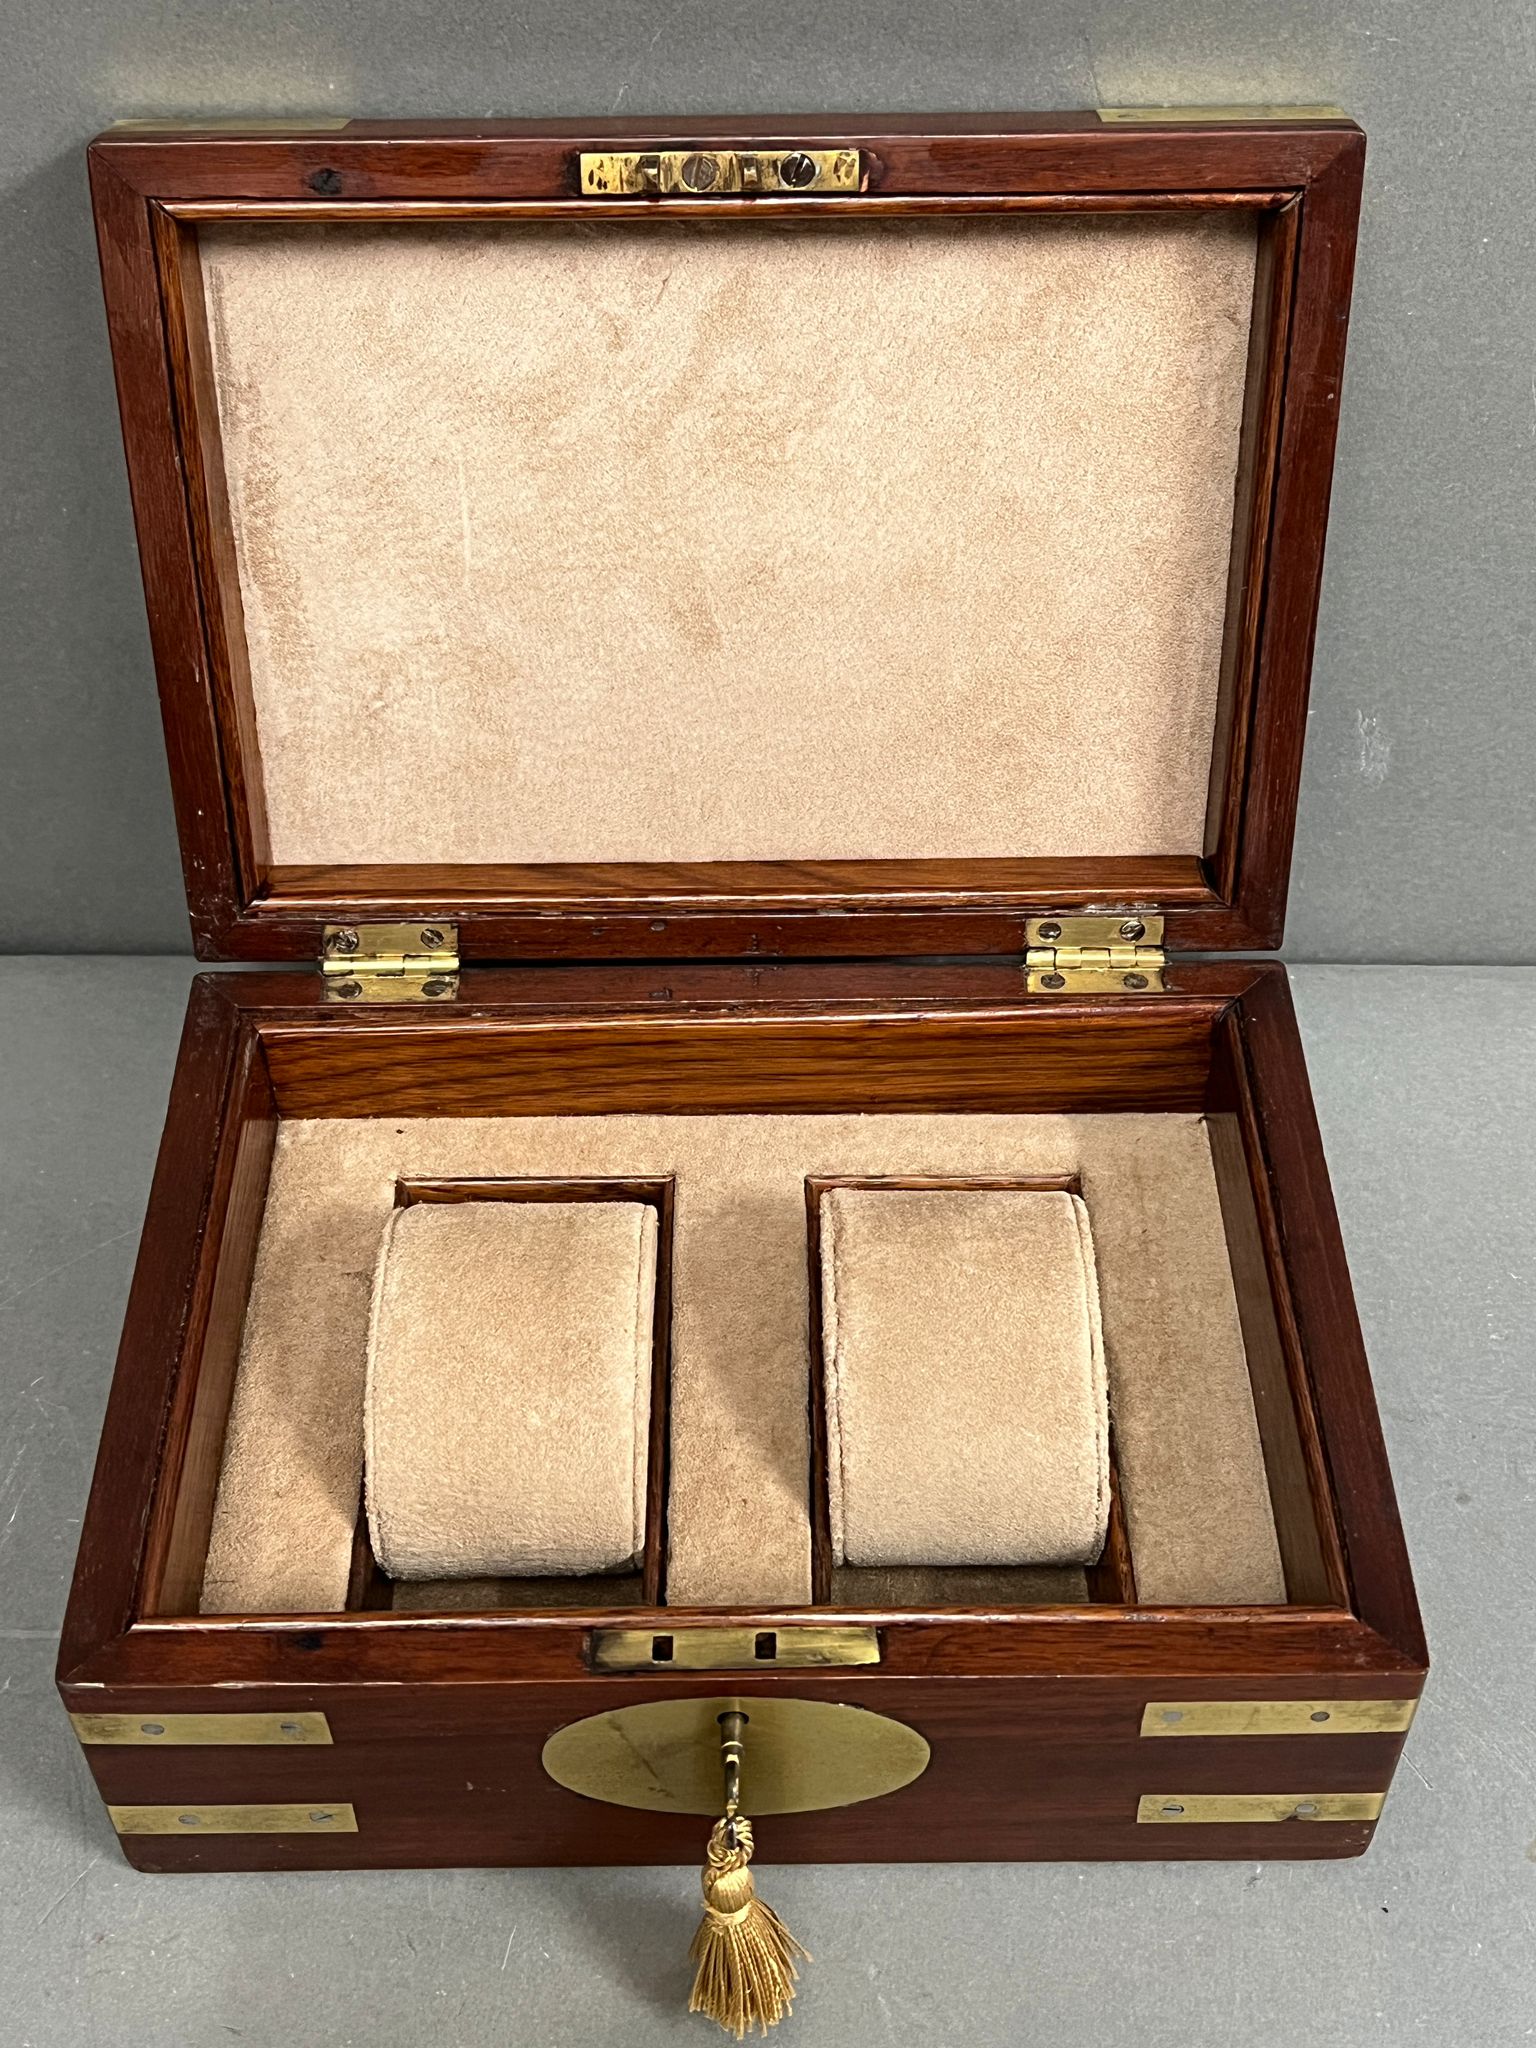 A brass banded watch box with key, two watches. - Image 2 of 3